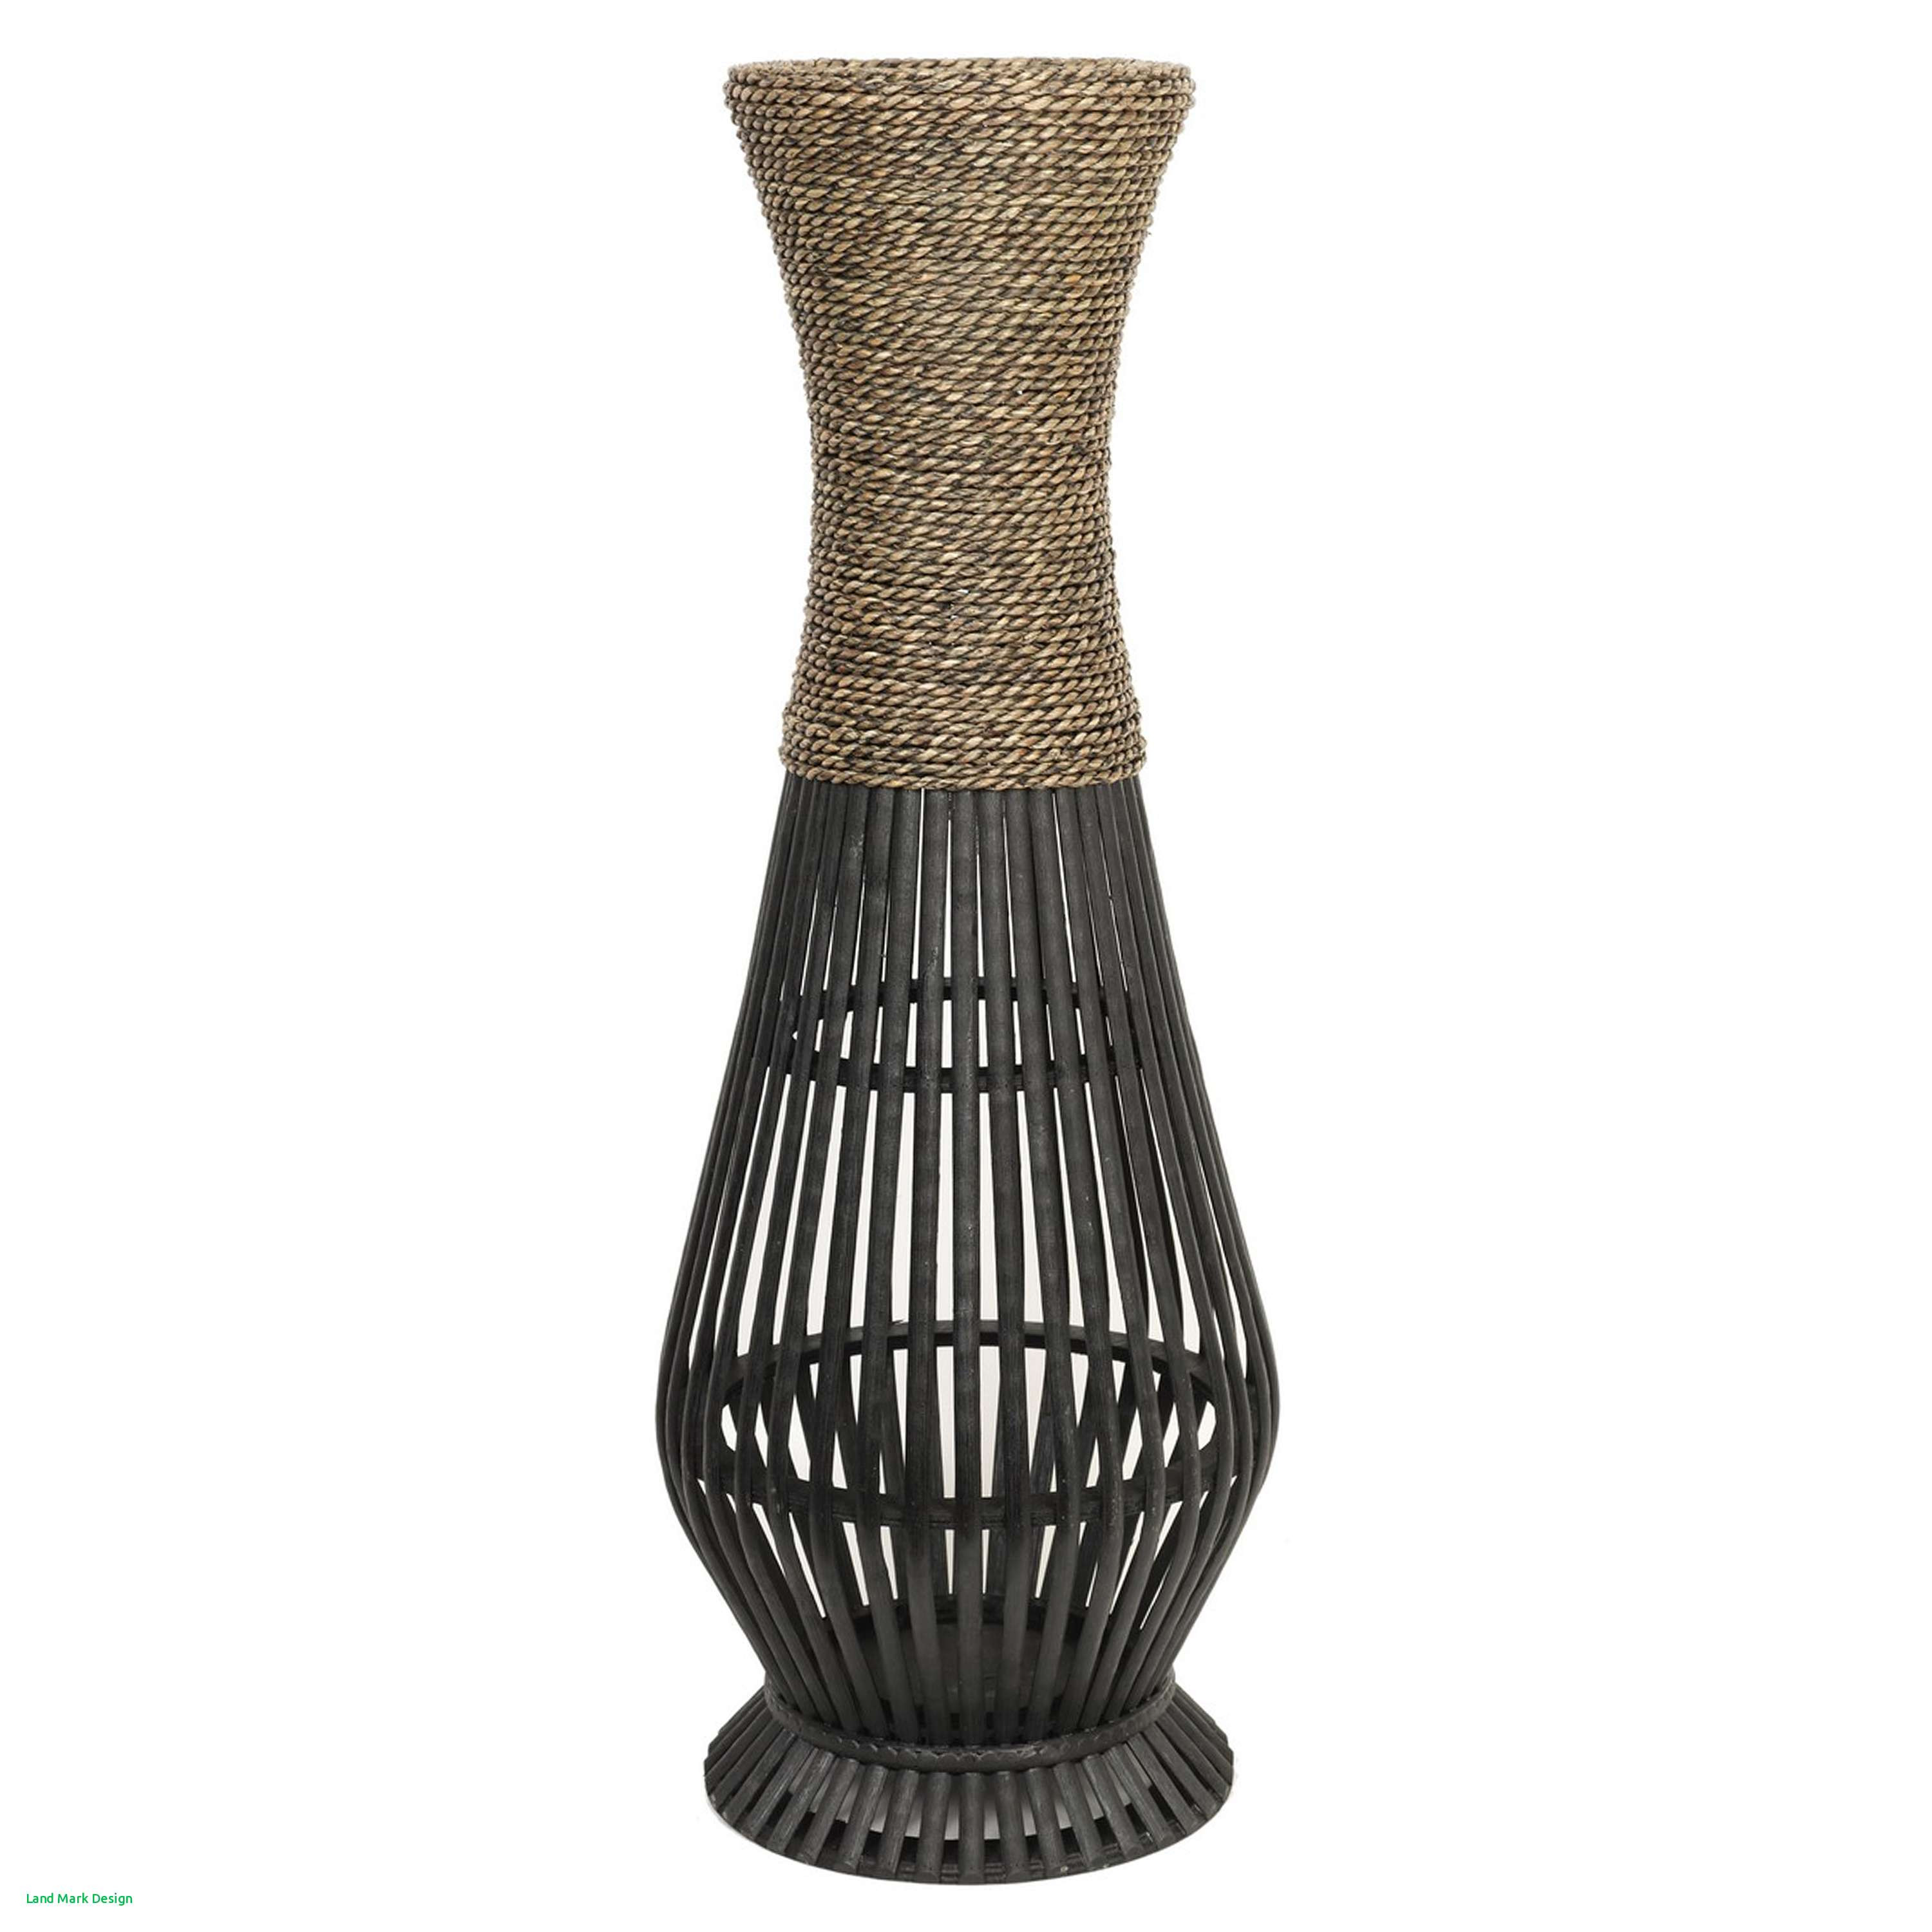 20 Fabulous Very Large Floor Vases 2024 free download very large floor vases of tall wicker vase design home design for 0bcc0b57 c2d1 4c6d ae1c 6534a6faae99 1 vases wicker tall i 3d